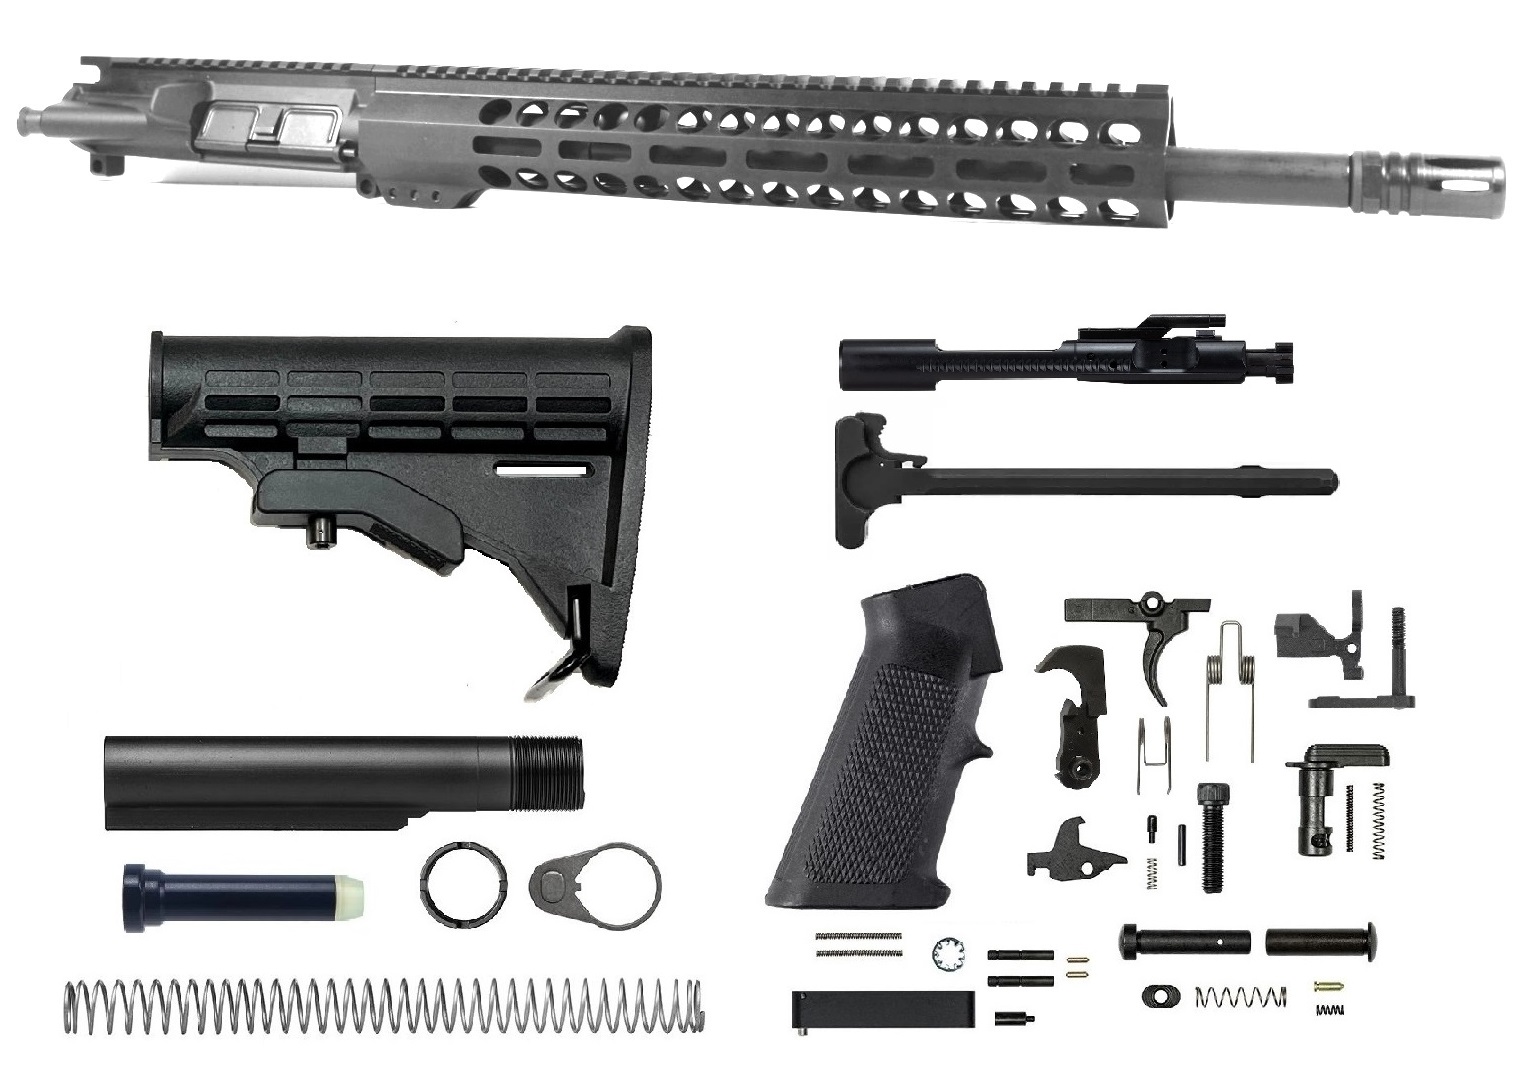 16 inch 300 Blackout AR-15 Upper Kit | Pro2A Tactical